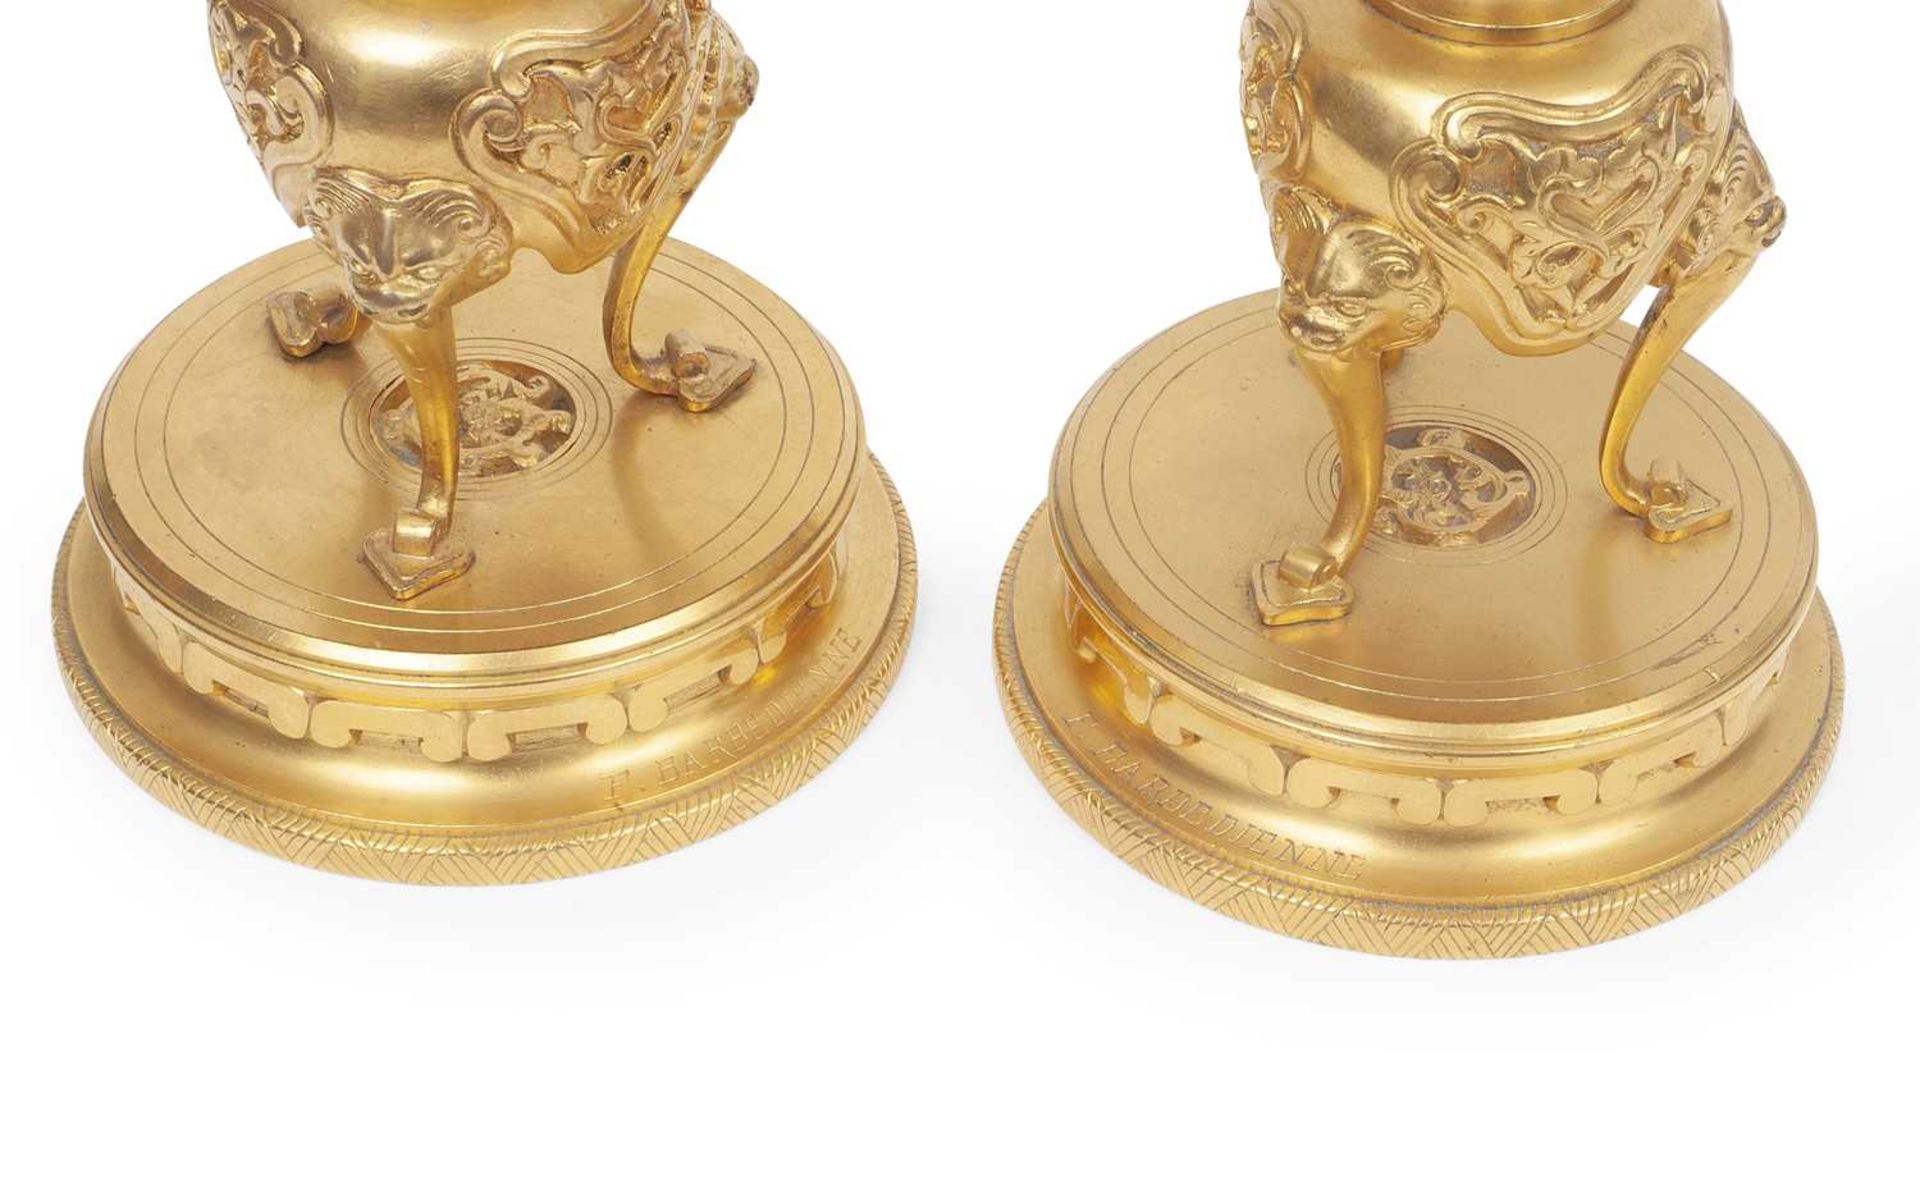 A VERY FINE PAIR OF 19TH CENTURY ORMOLU CANDELABRA BY BARBEDIENNE AND EDOUARD LIEVRE - Image 3 of 4